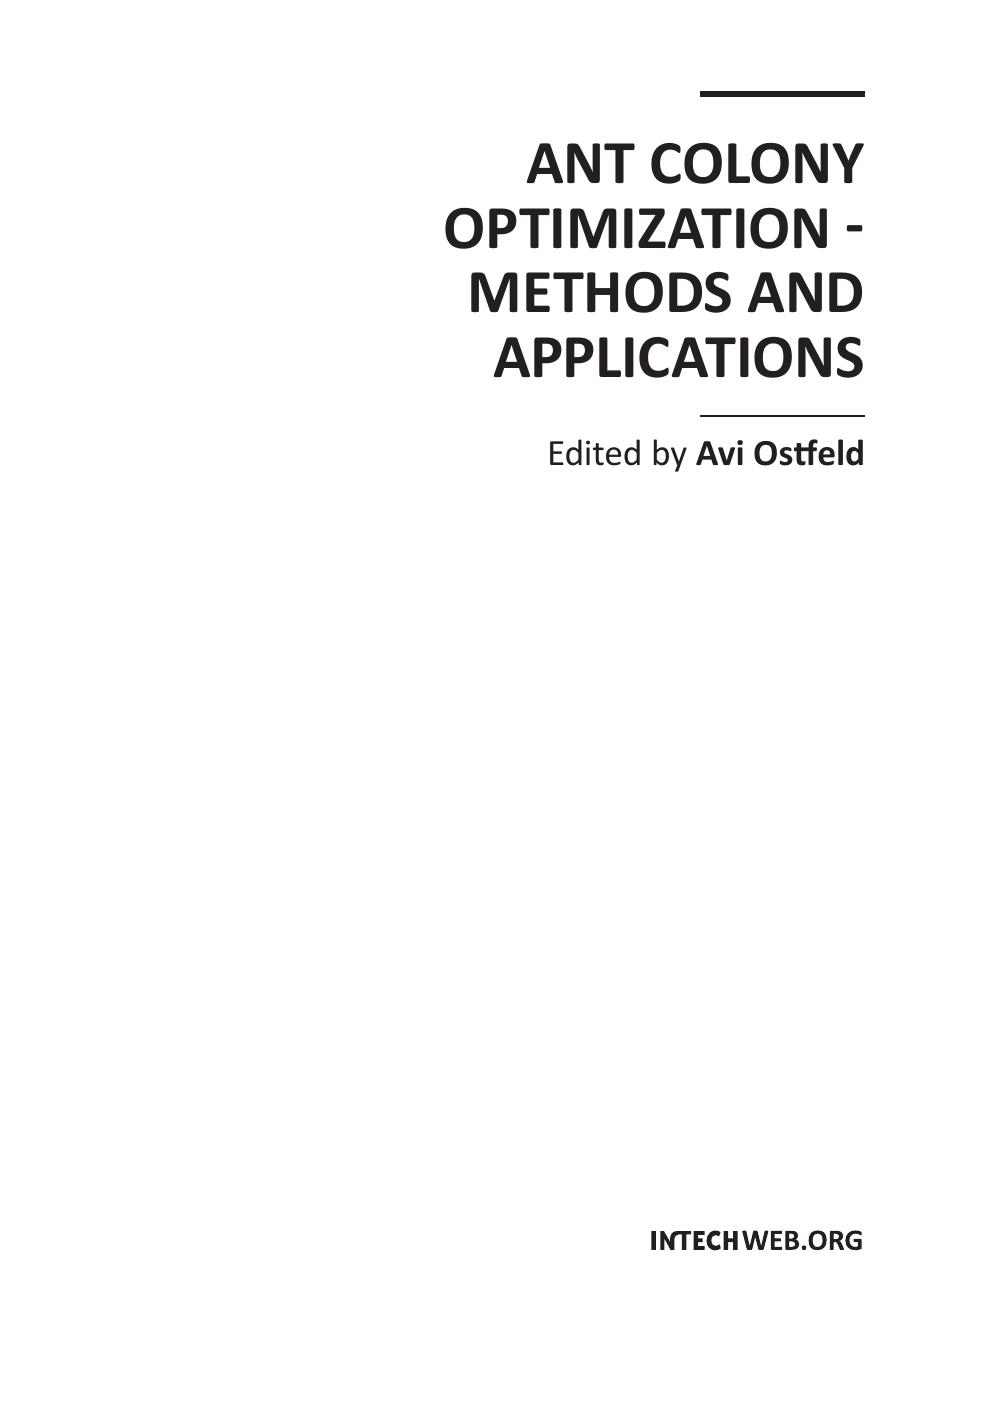 Ant Colony Optimization - Methods and Applications.indd